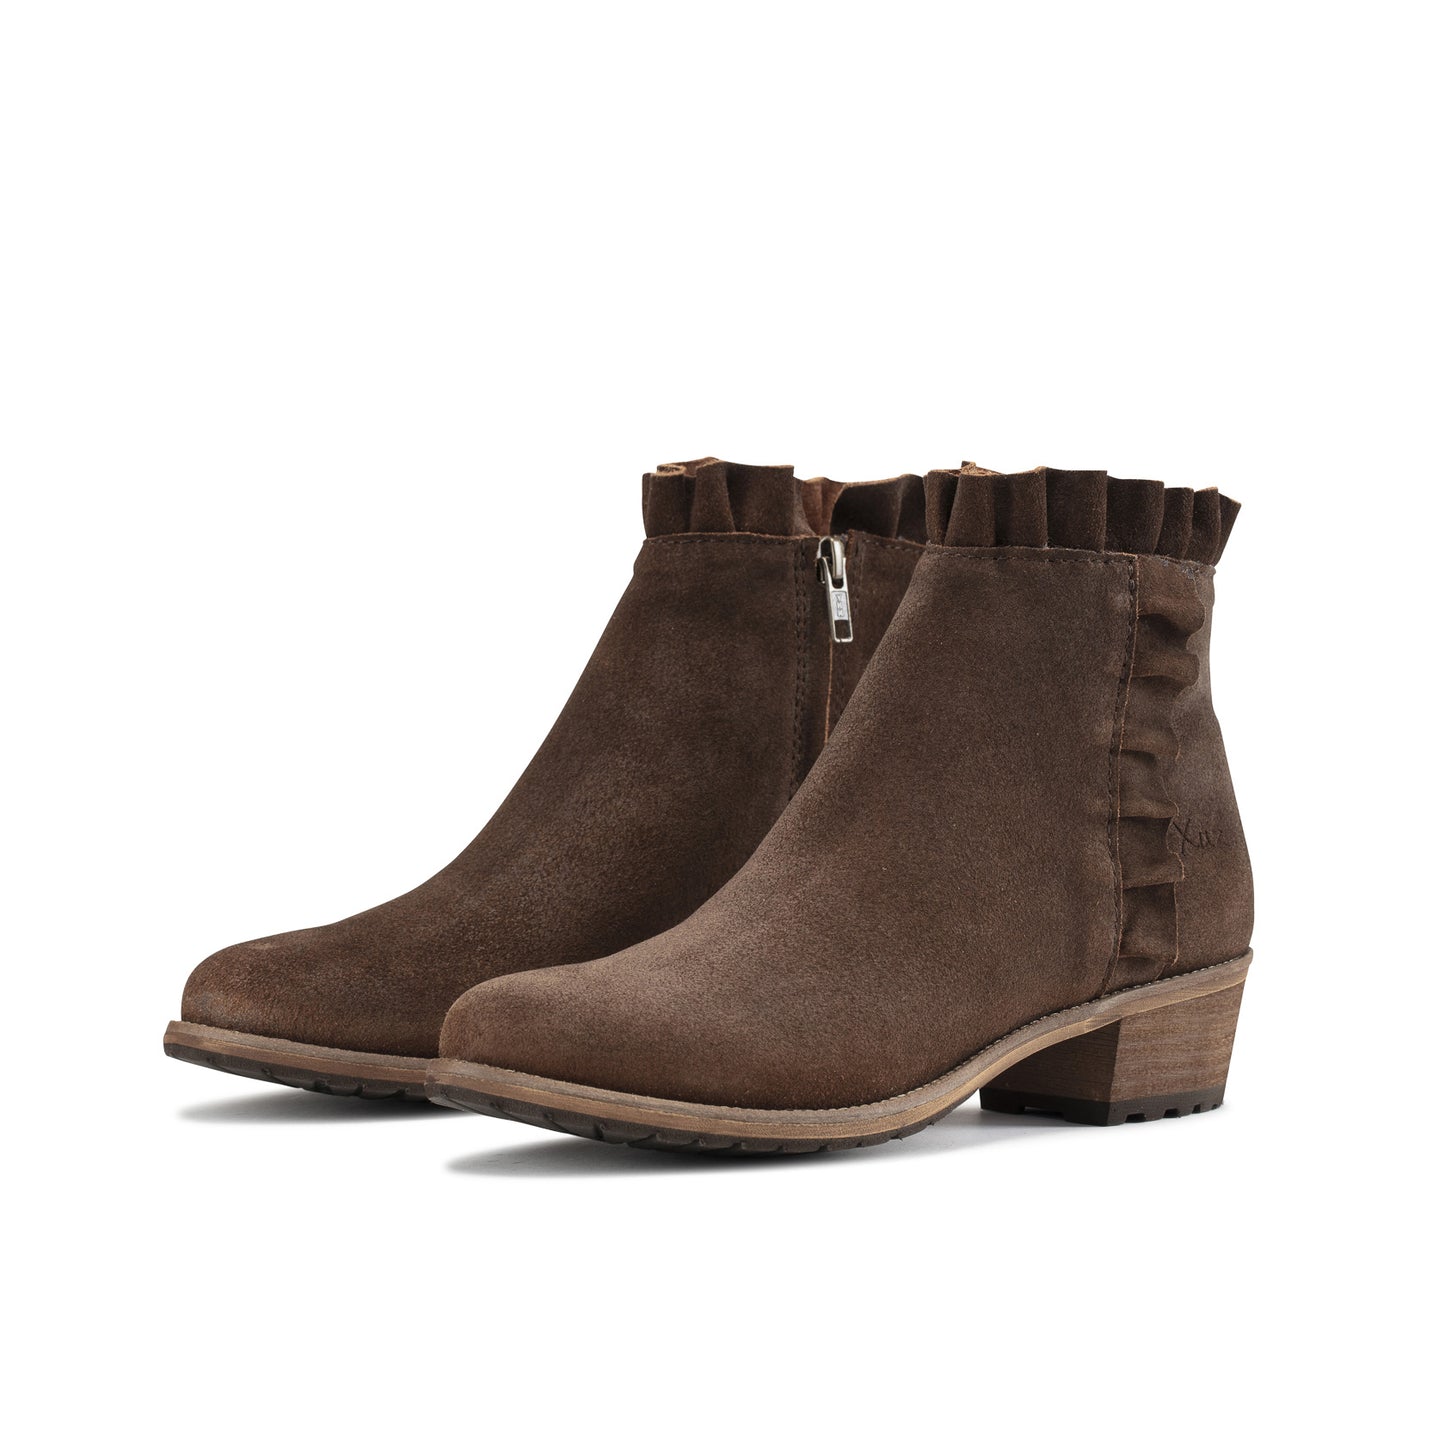 Boot with Brown Frill